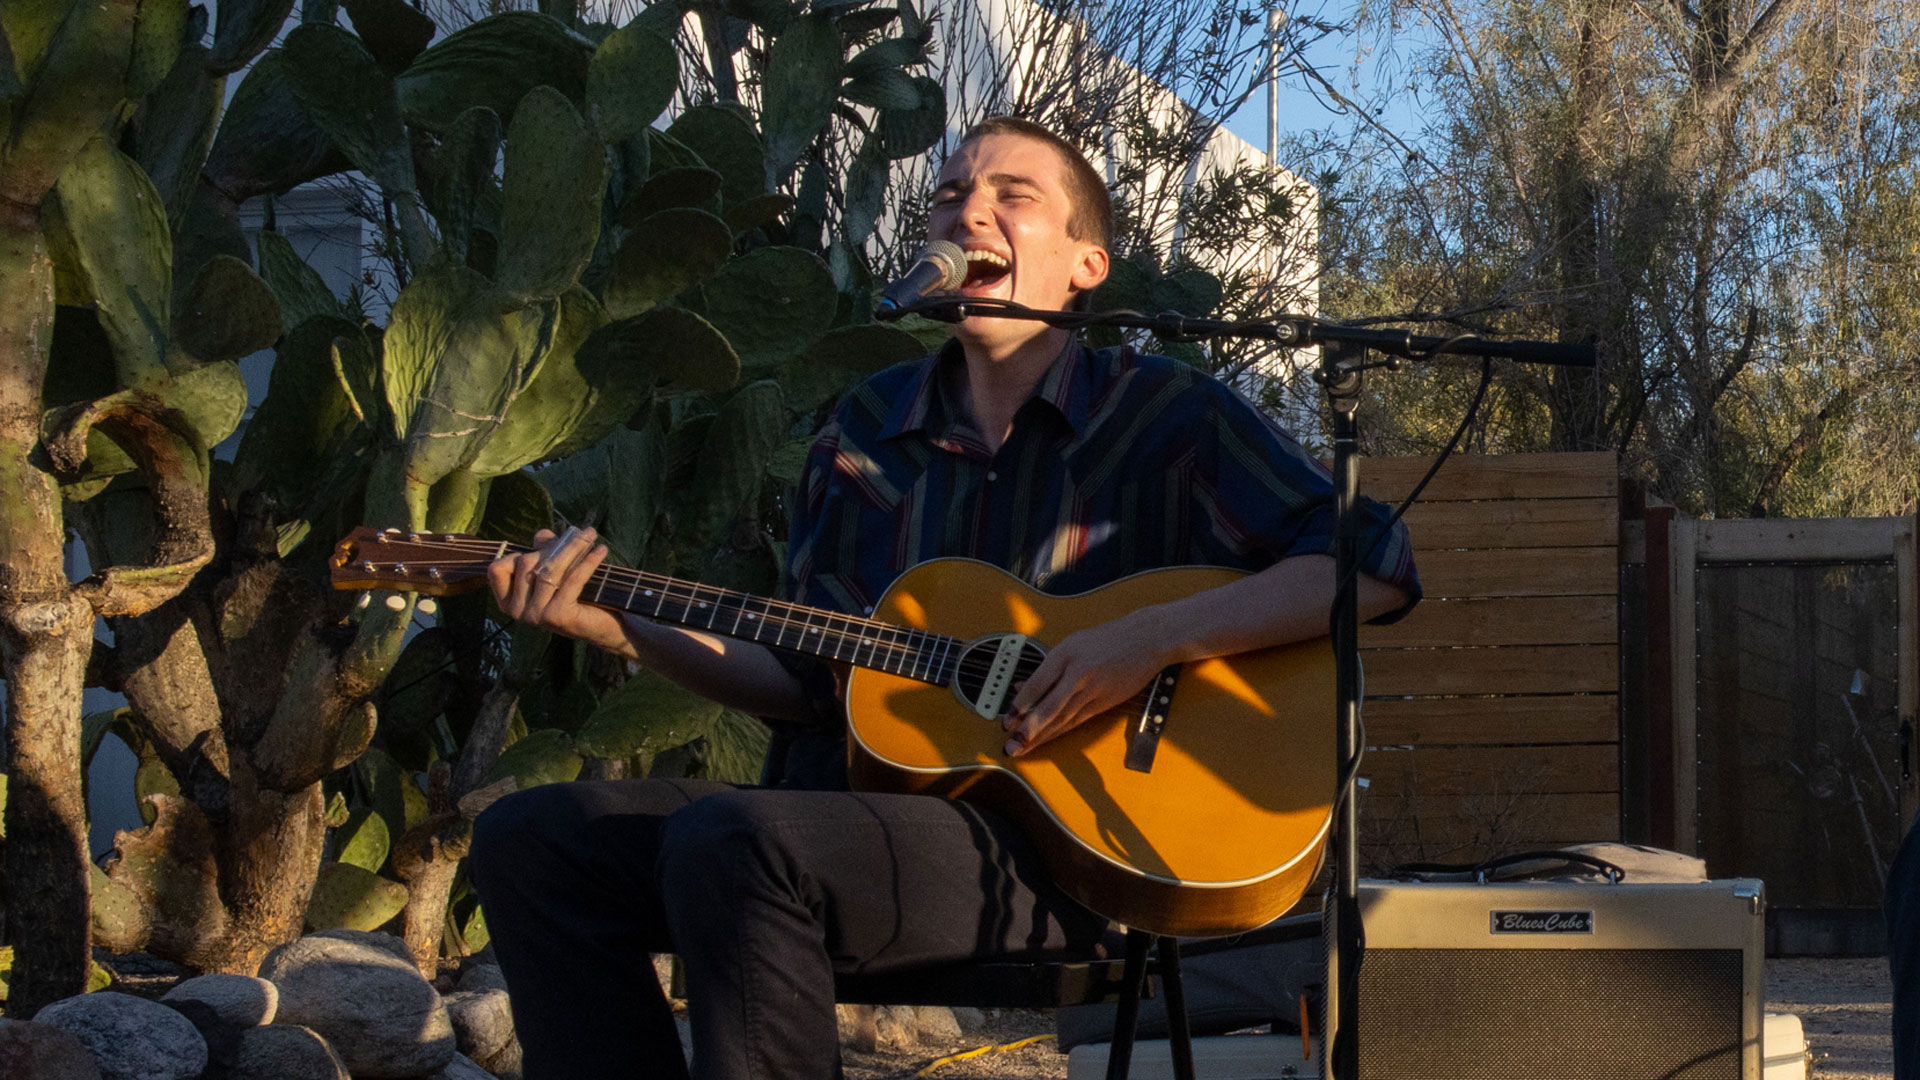 Roman Barten-Sherman has been performing the blues in Southern Arizona since before he was in middle school. This year, he heads off to a five-year Contemporary Improvisation program at Tufts University and the New England Conservatory